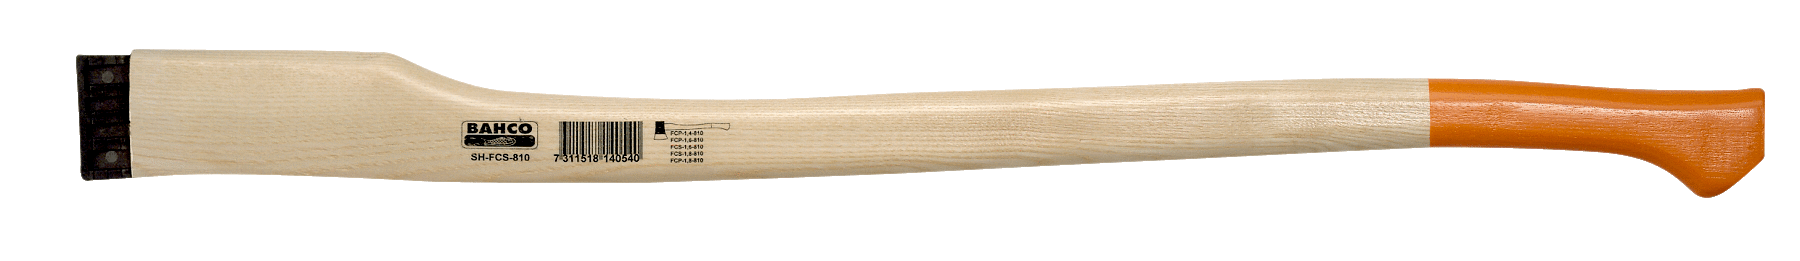 Bahco SH-MCS-800 Spare Handles for pick  Axes of Ash Wood 800mm Beige